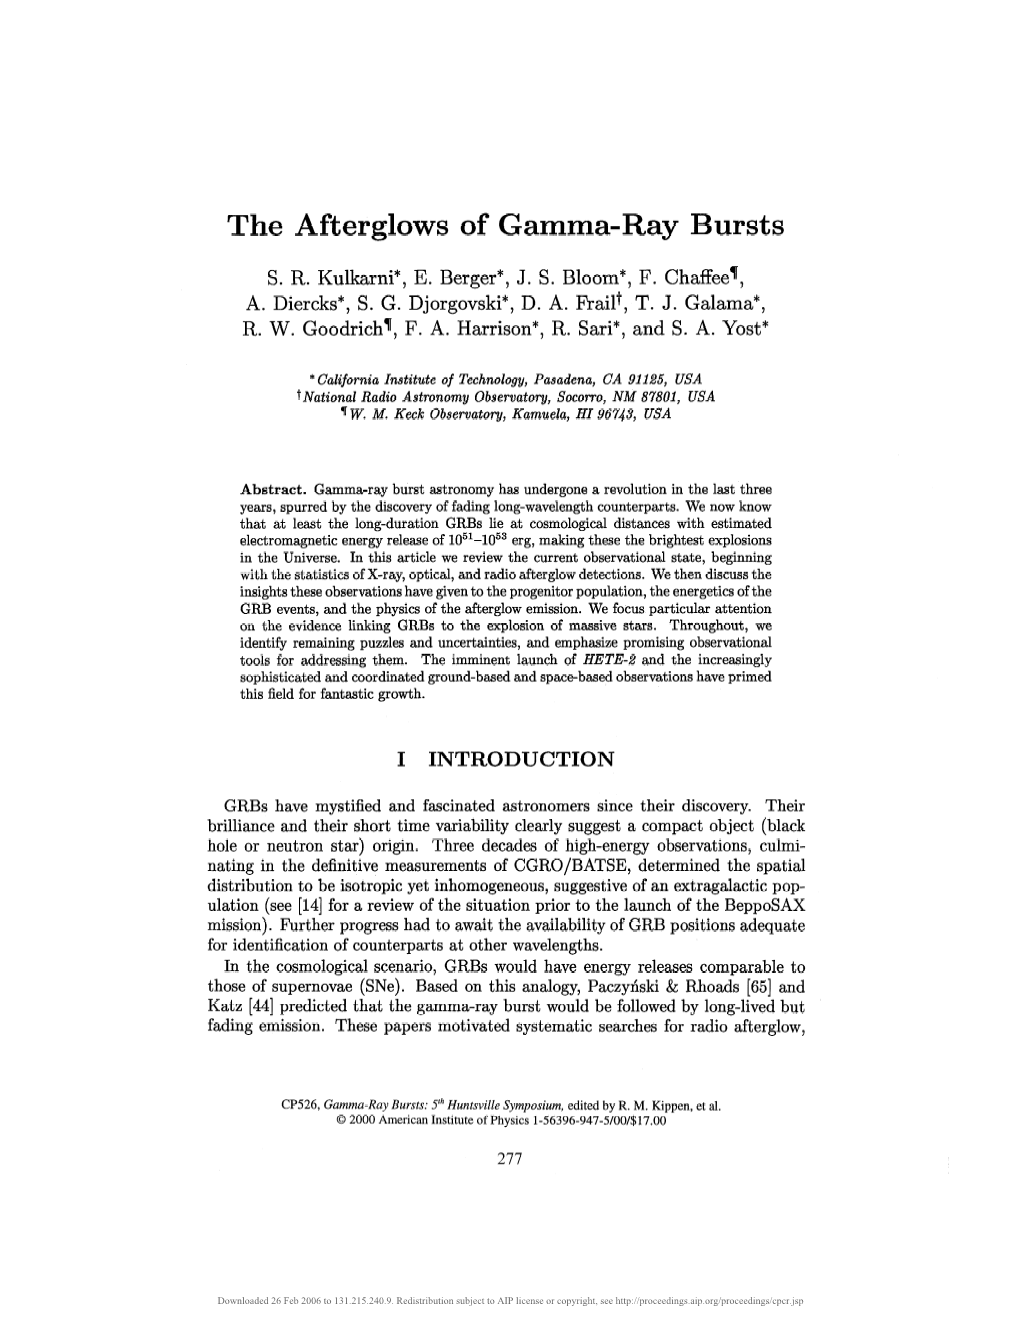 The Afterglows of Gamma-Ray Bursts